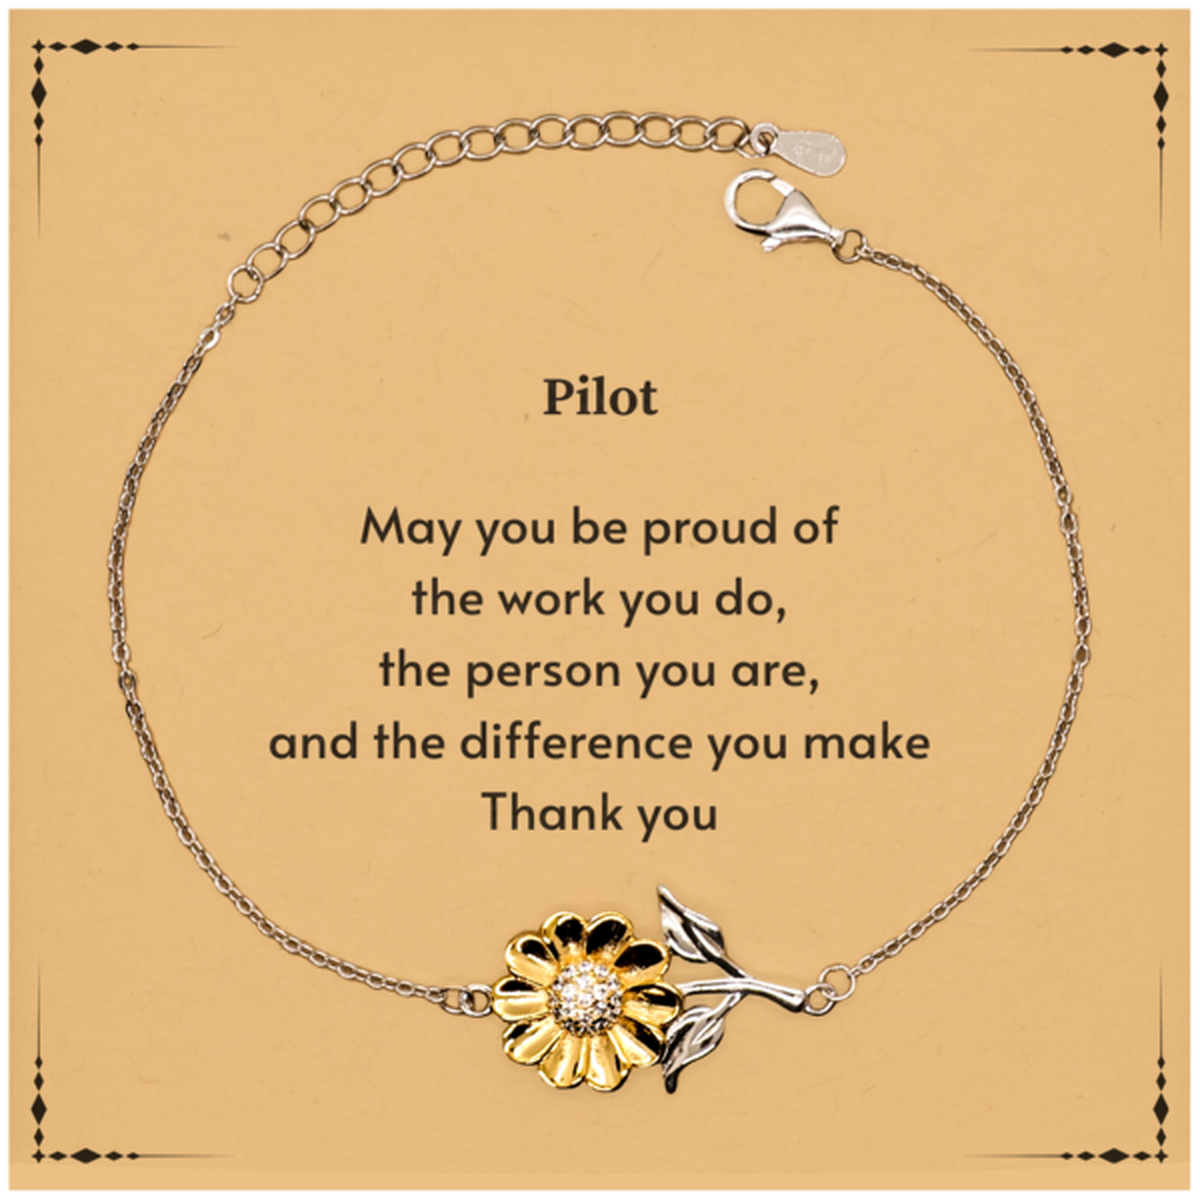 Heartwarming Sunflower Bracelet Retirement Coworkers Gifts for Pilot, Pilot May You be proud of the work you do, the person you are Gifts for Boss Men Women Friends